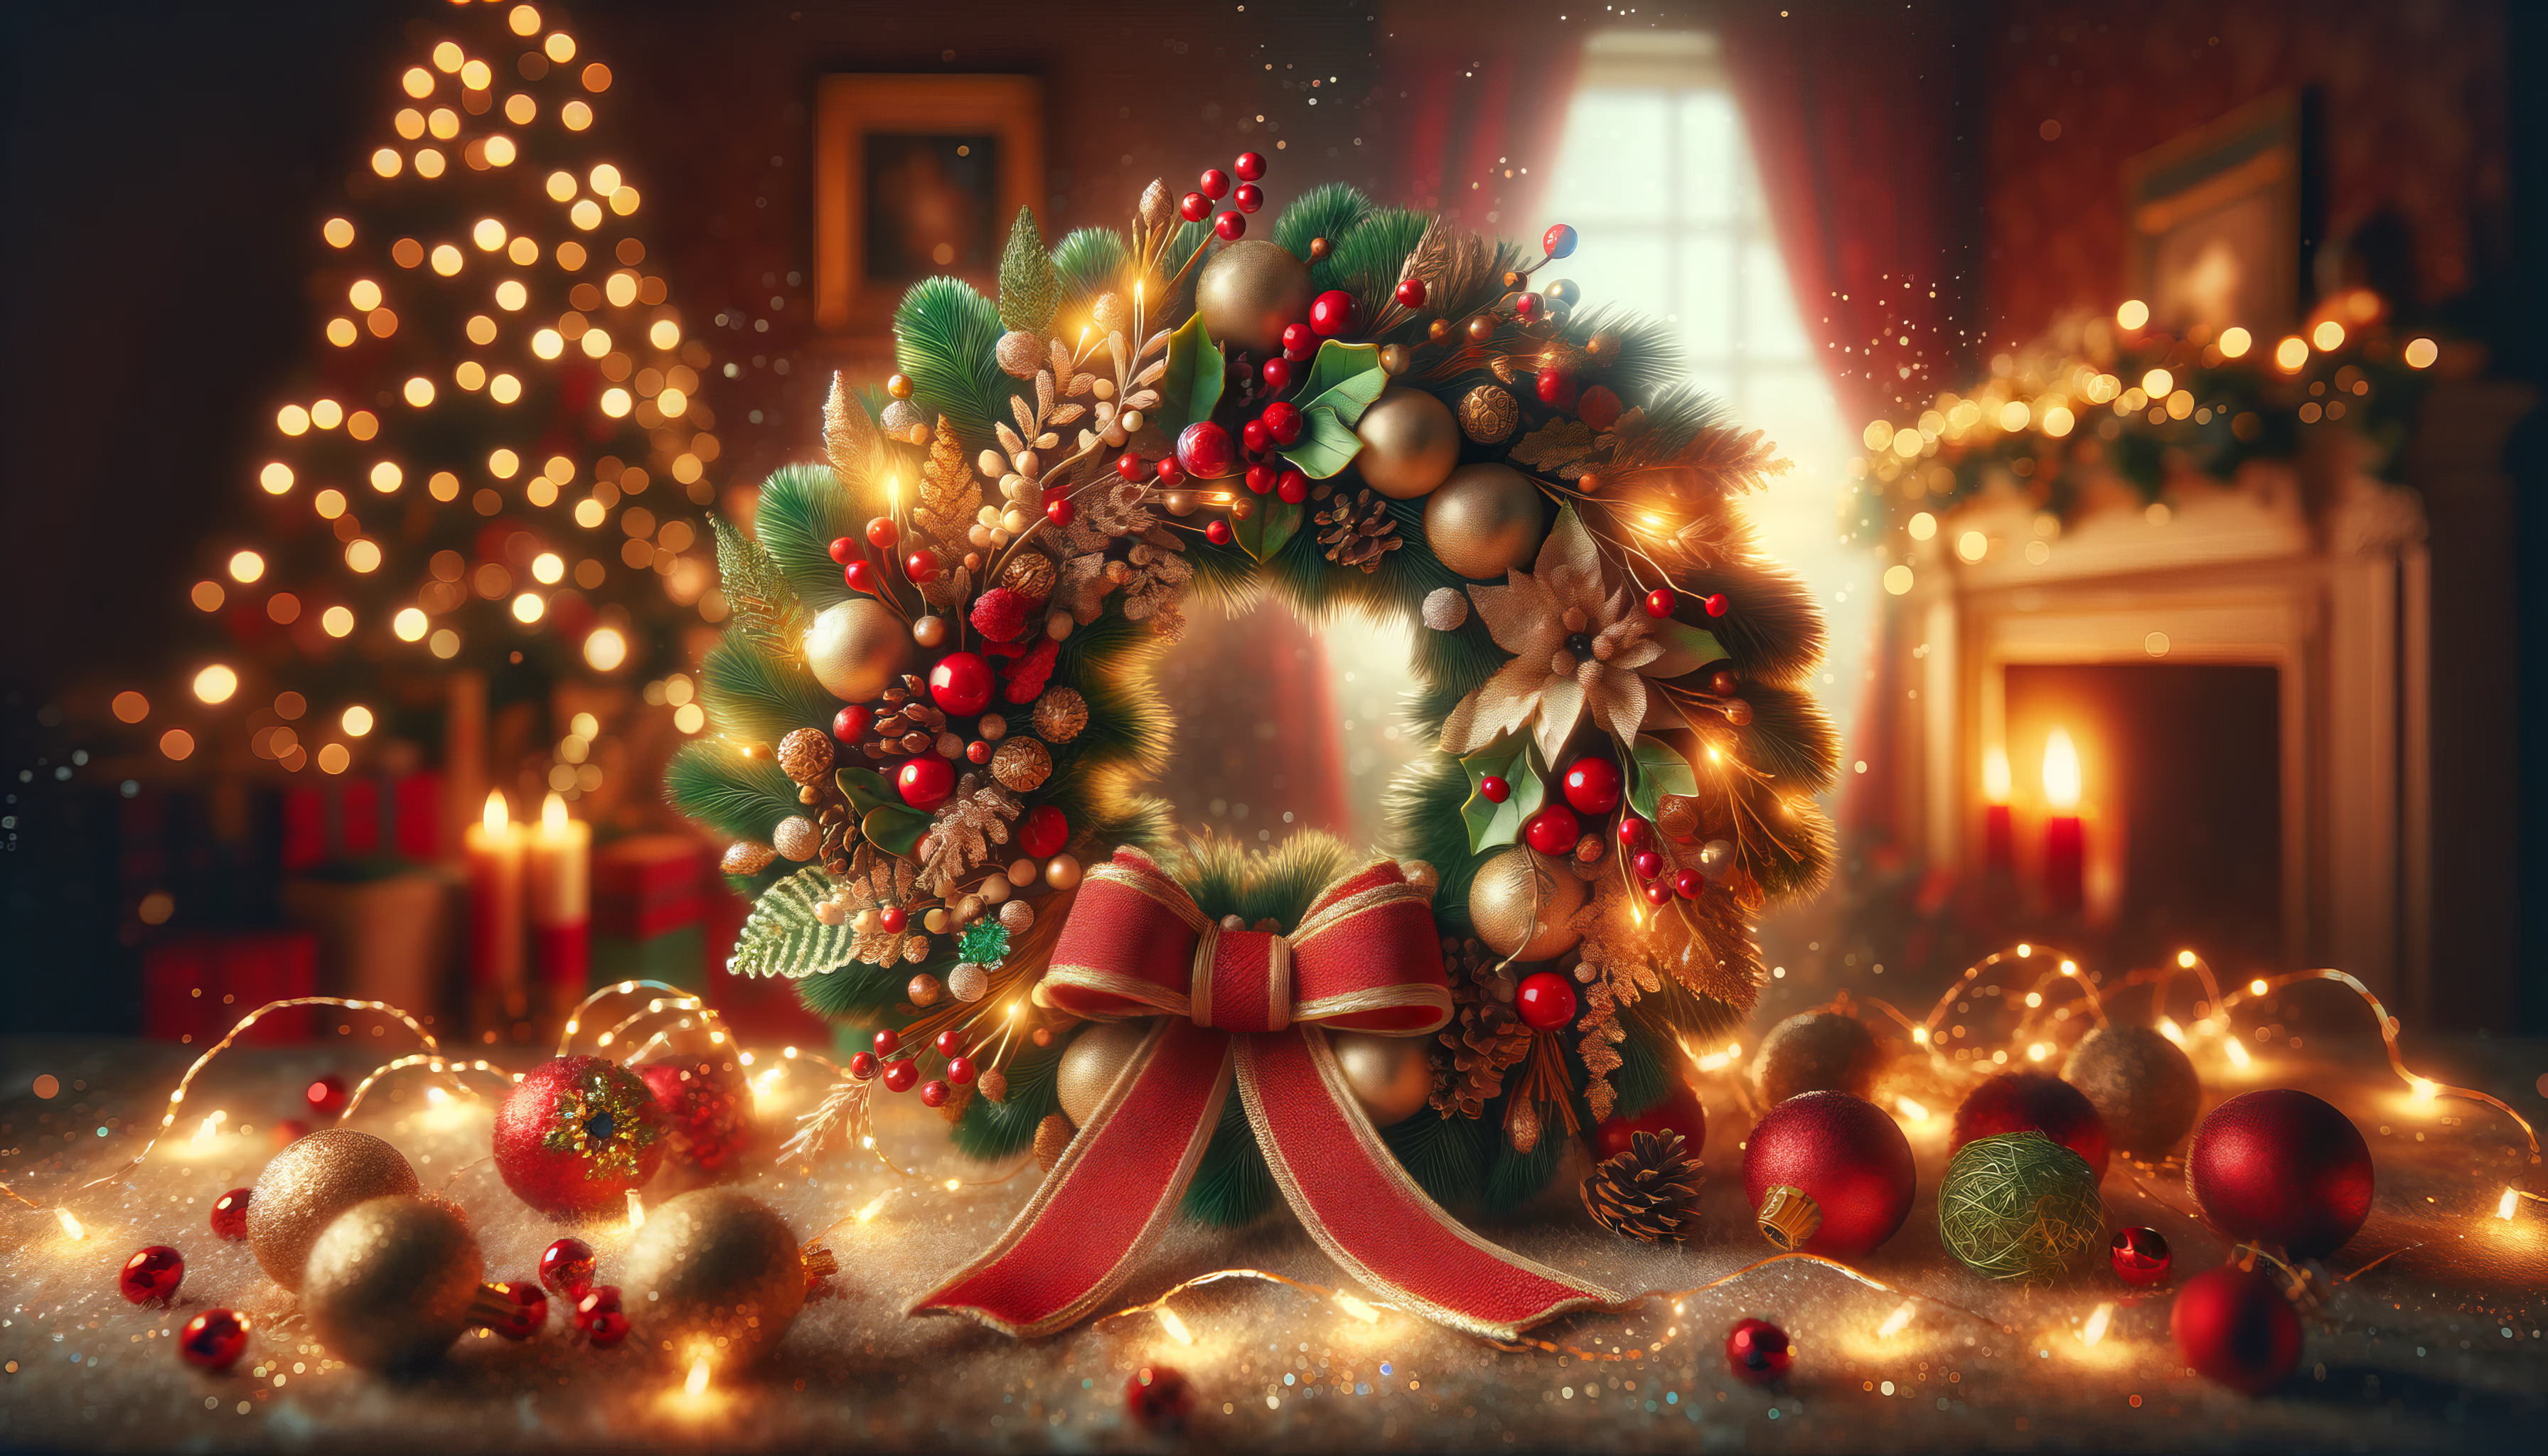 HD festive desktop wallpaper featuring a Christmas wreath with red berries and a golden bow, surrounded by sparkling lights and decorations.